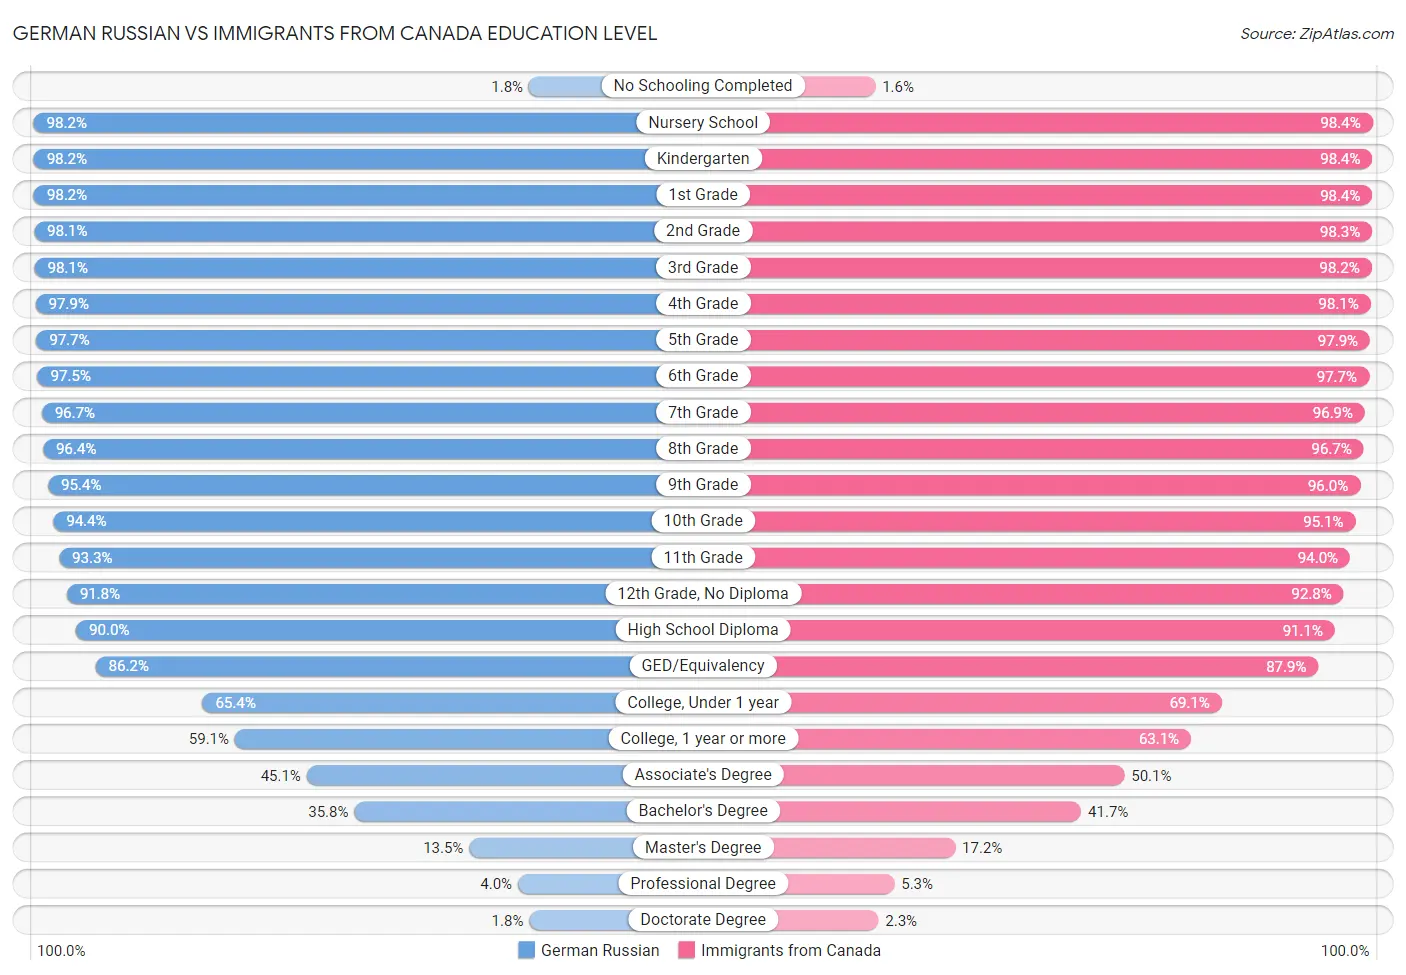 German Russian vs Immigrants from Canada Education Level